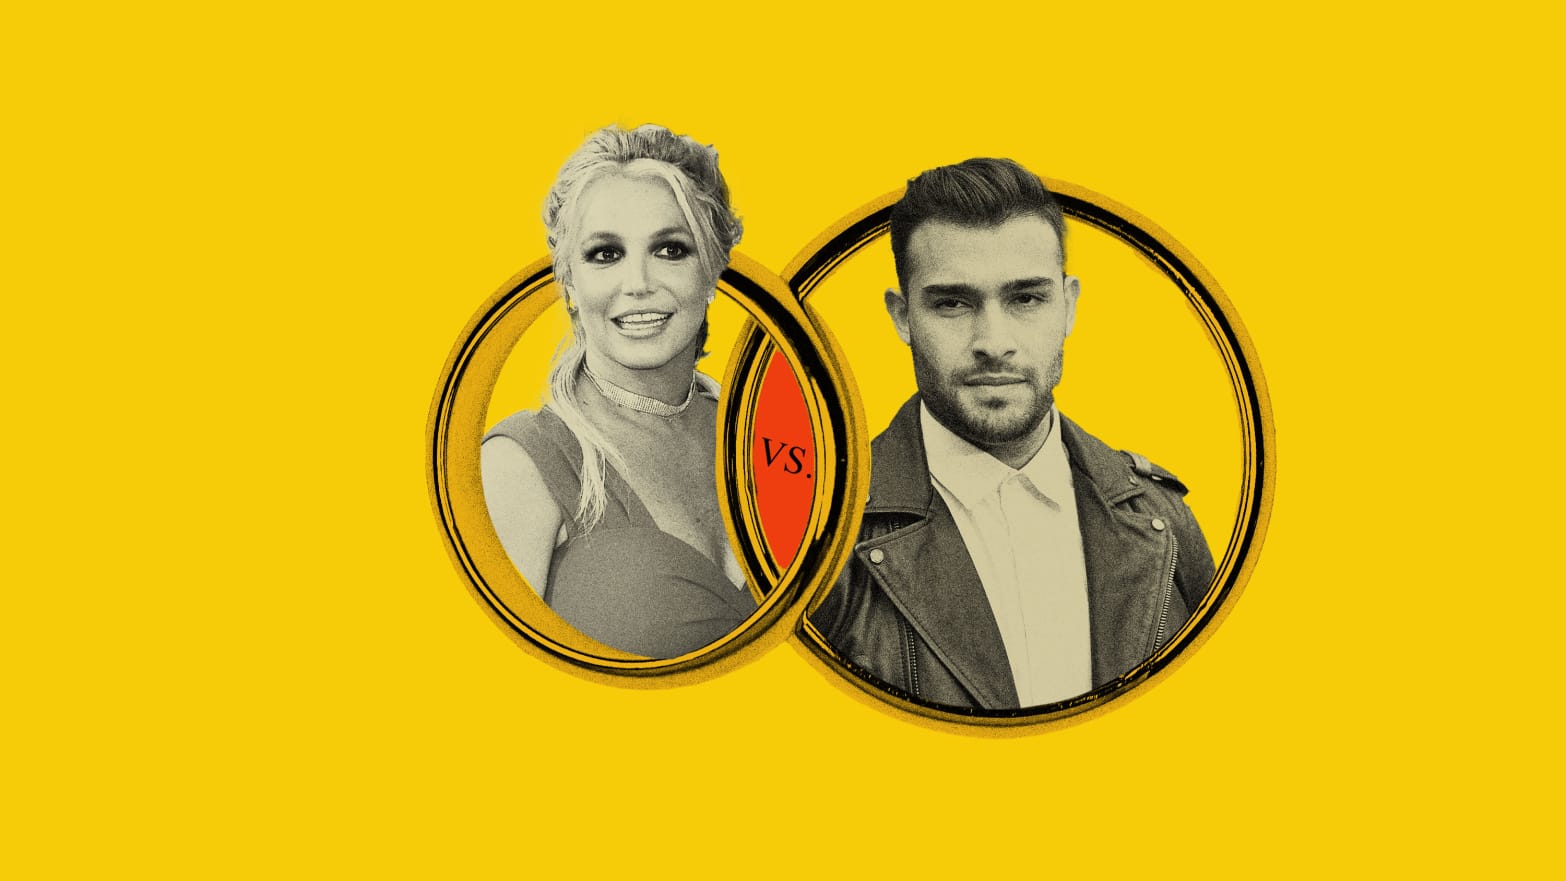 Photo illustration of Britney Spears and her soon to be ex-husband Sam Asghari collaged into wedding rings.